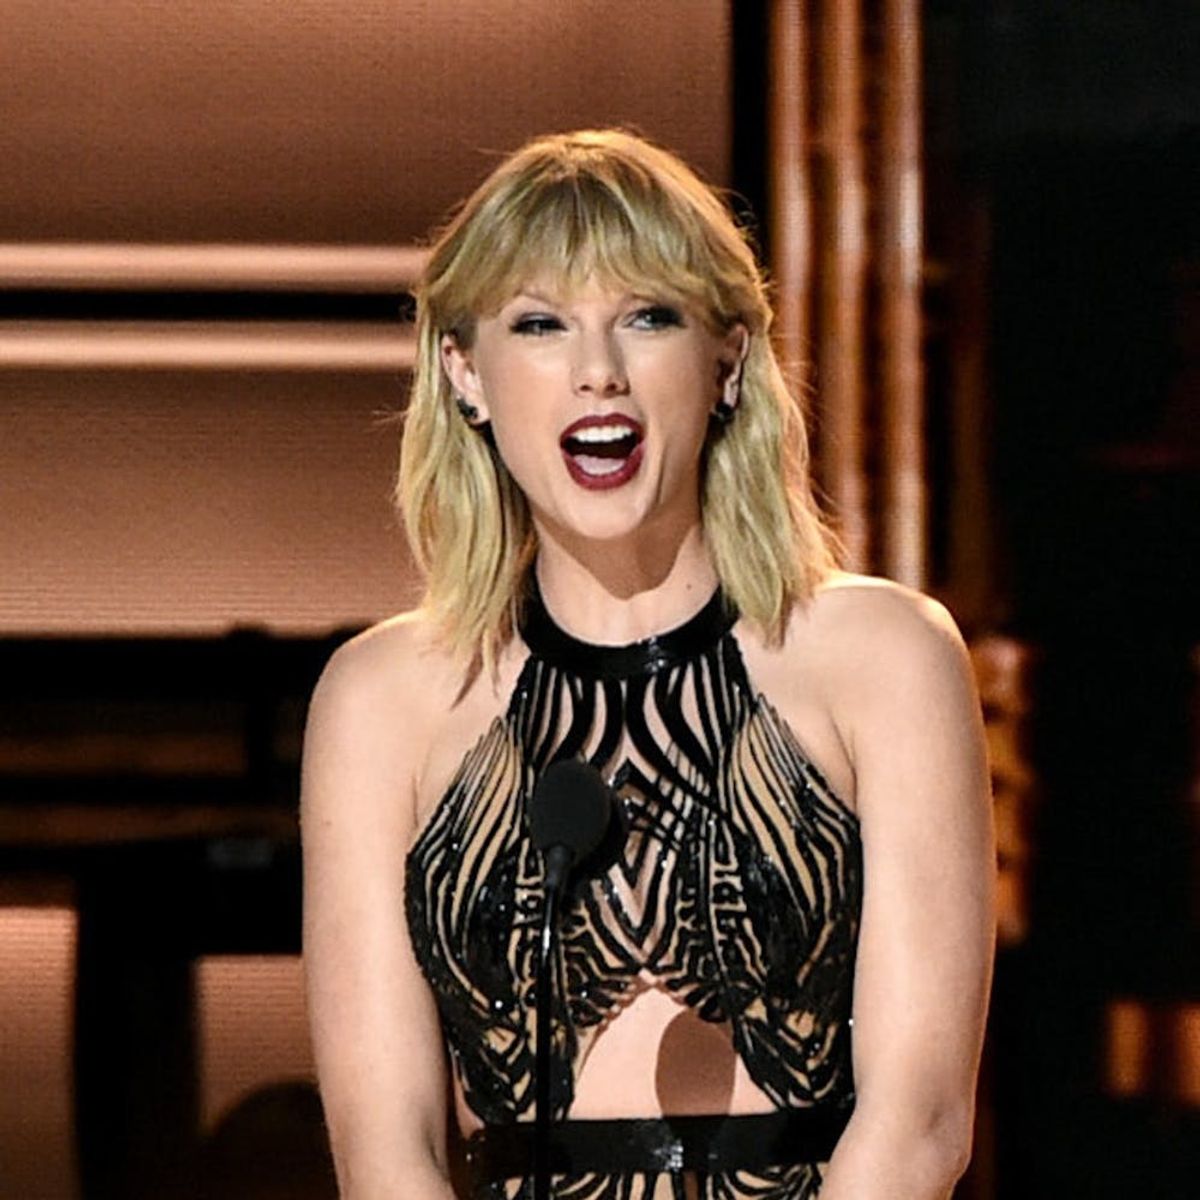 Taylor Swift’s New Song “Call It What You Want” Might Be Her Most Revealing Yet